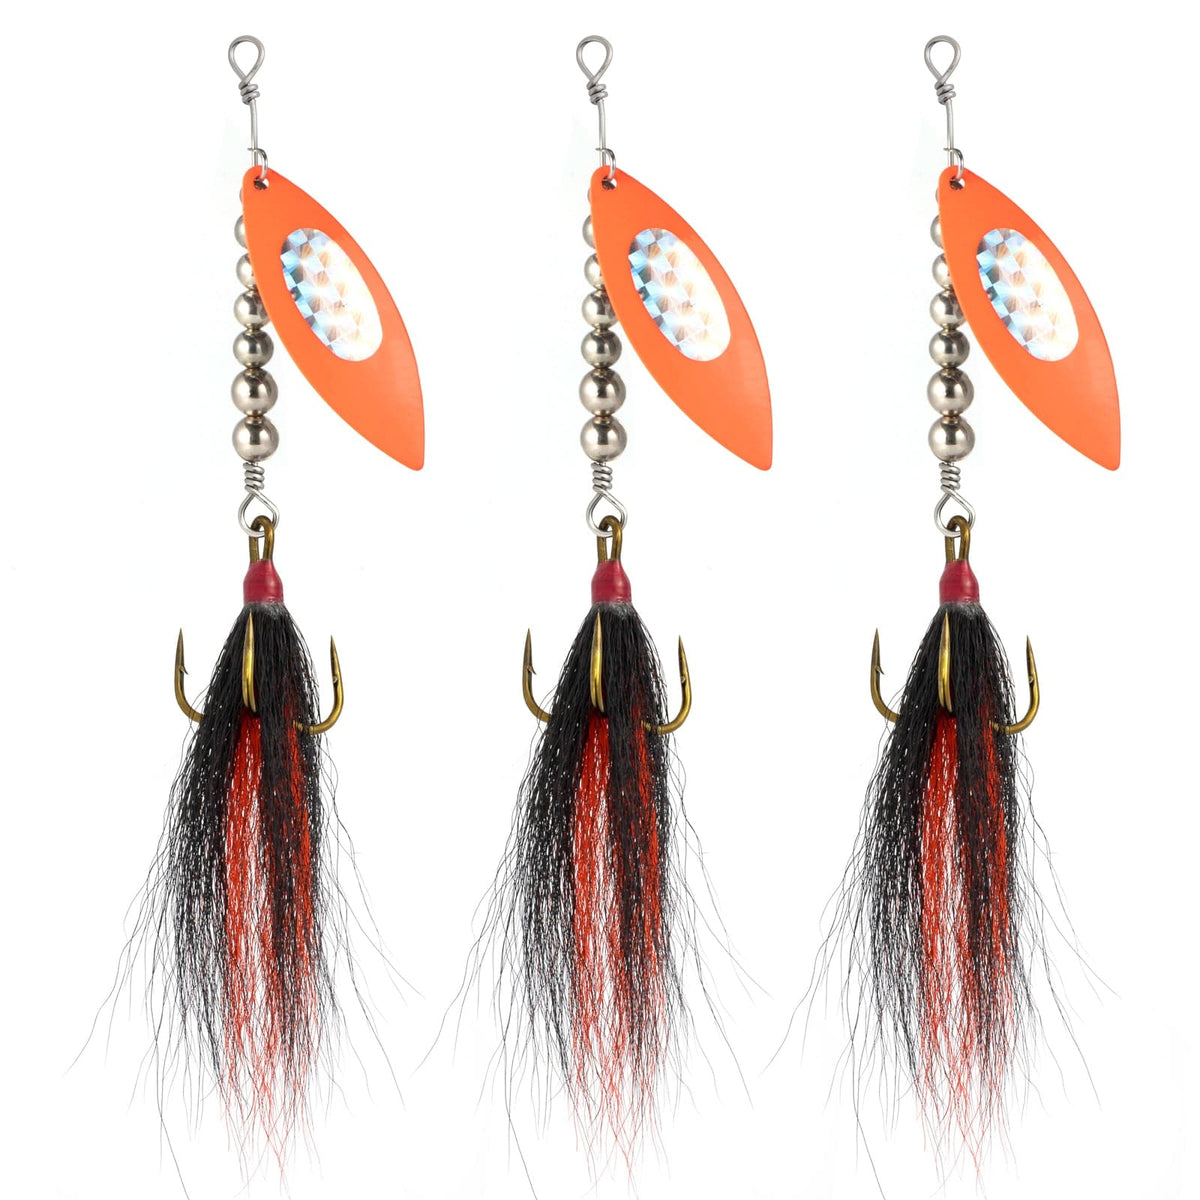 Dr.Fish 3pcs Musky Spinner Lures